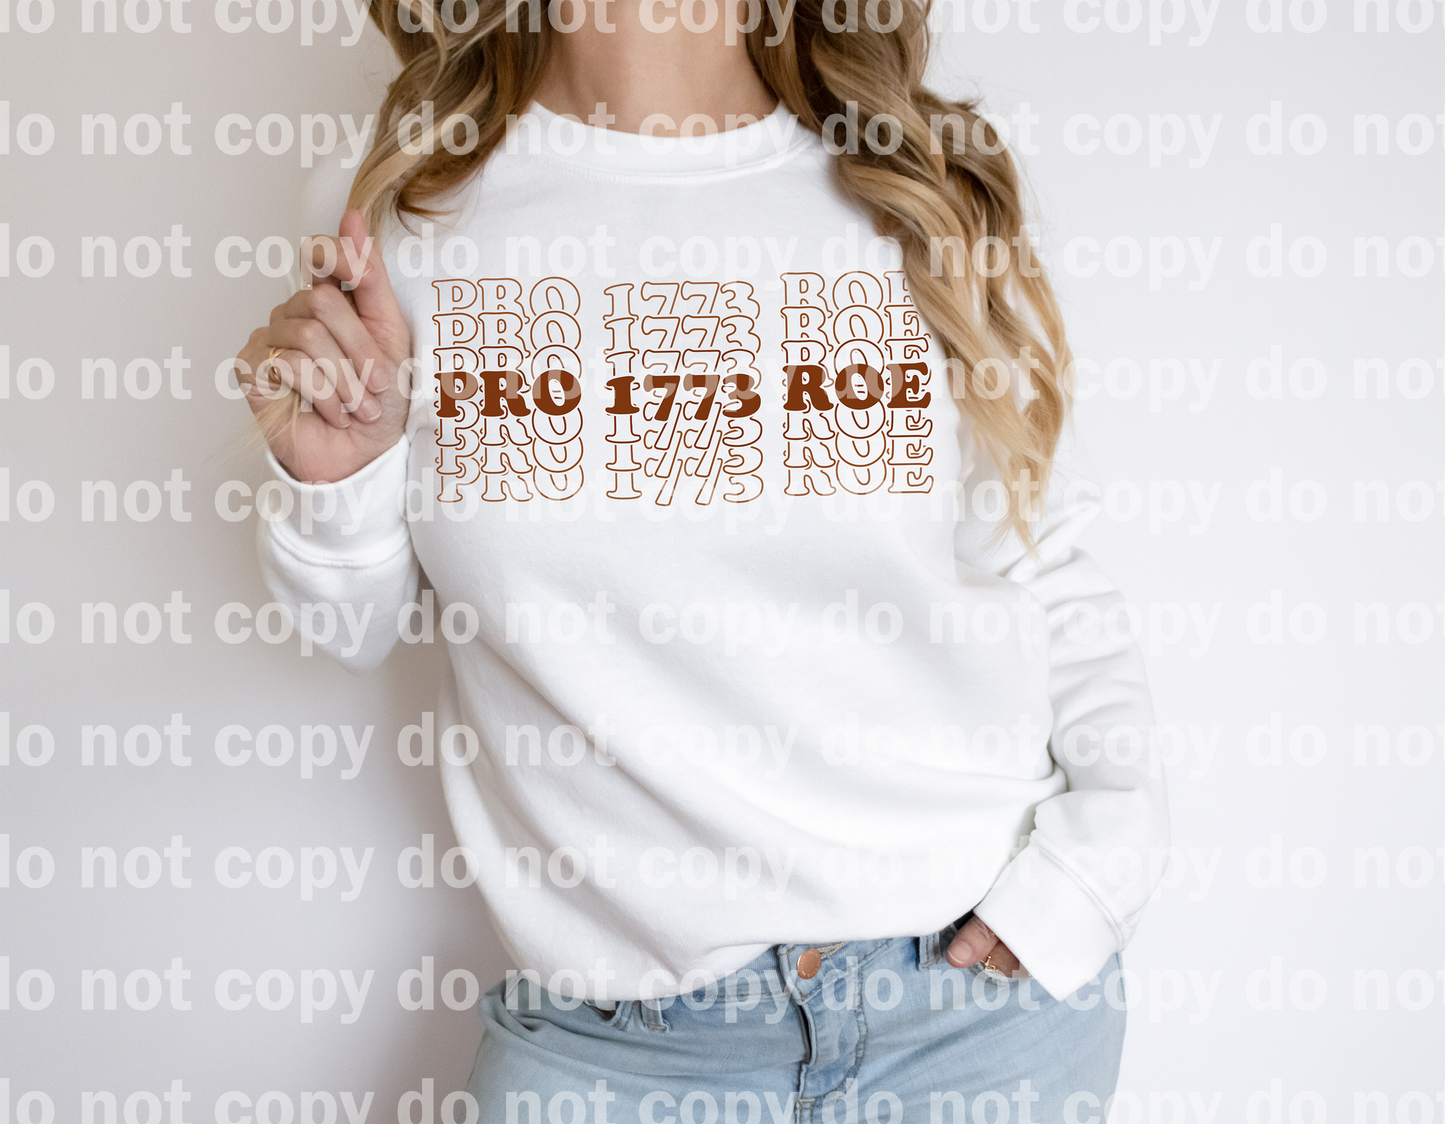 Pro 1773 Roe Dream Print or Sublimation Print